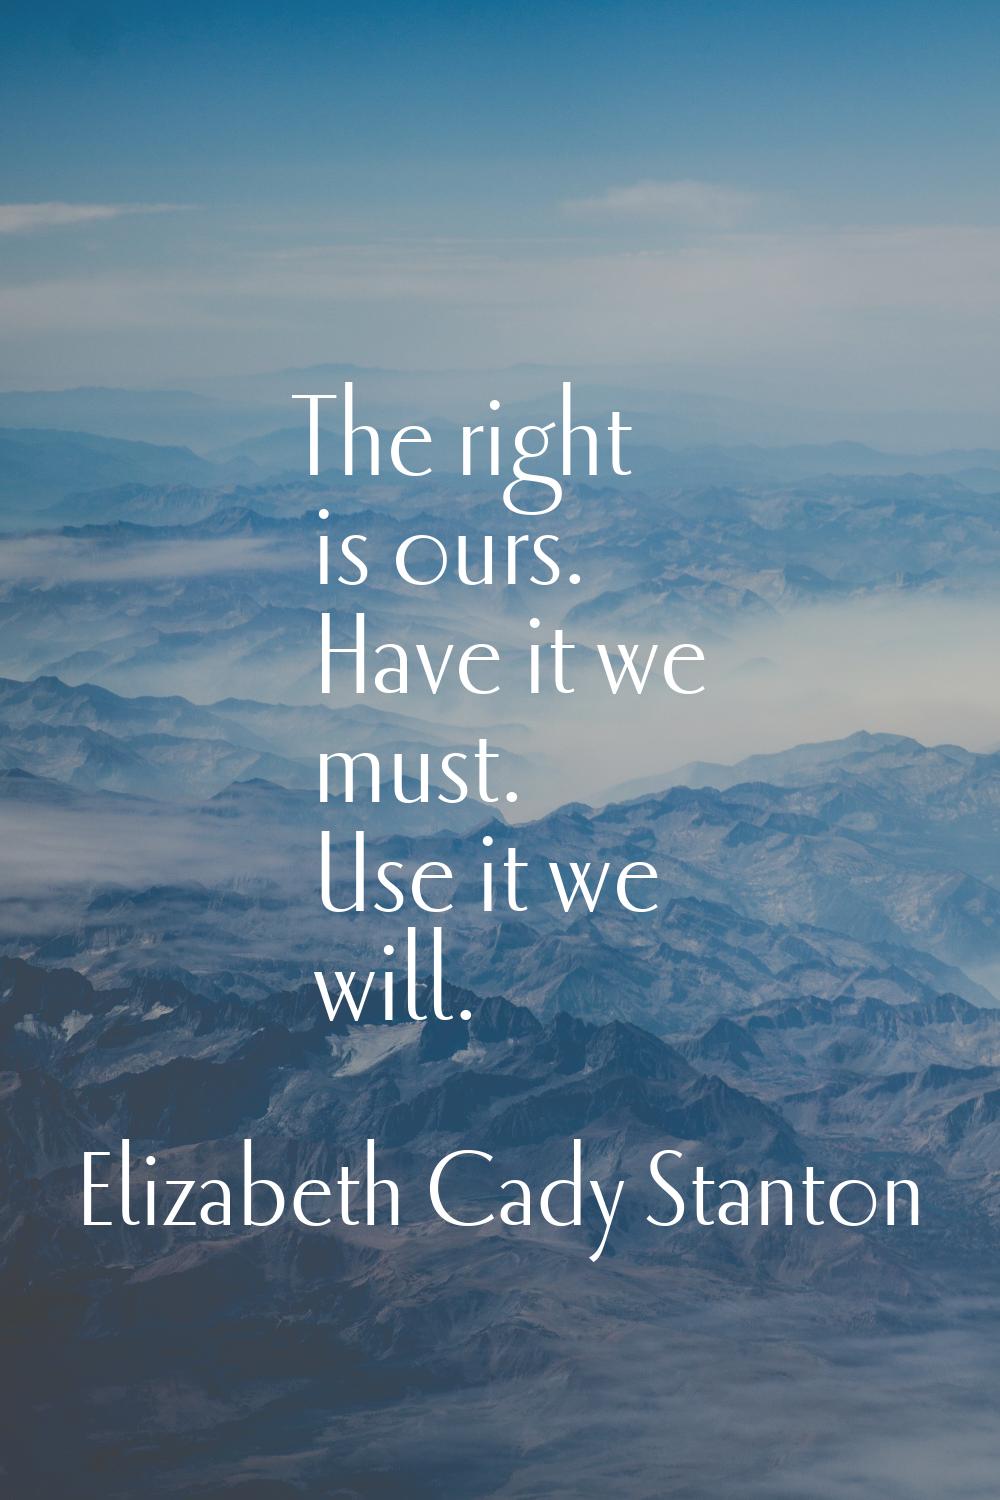 The right is ours. Have it we must. Use it we will.